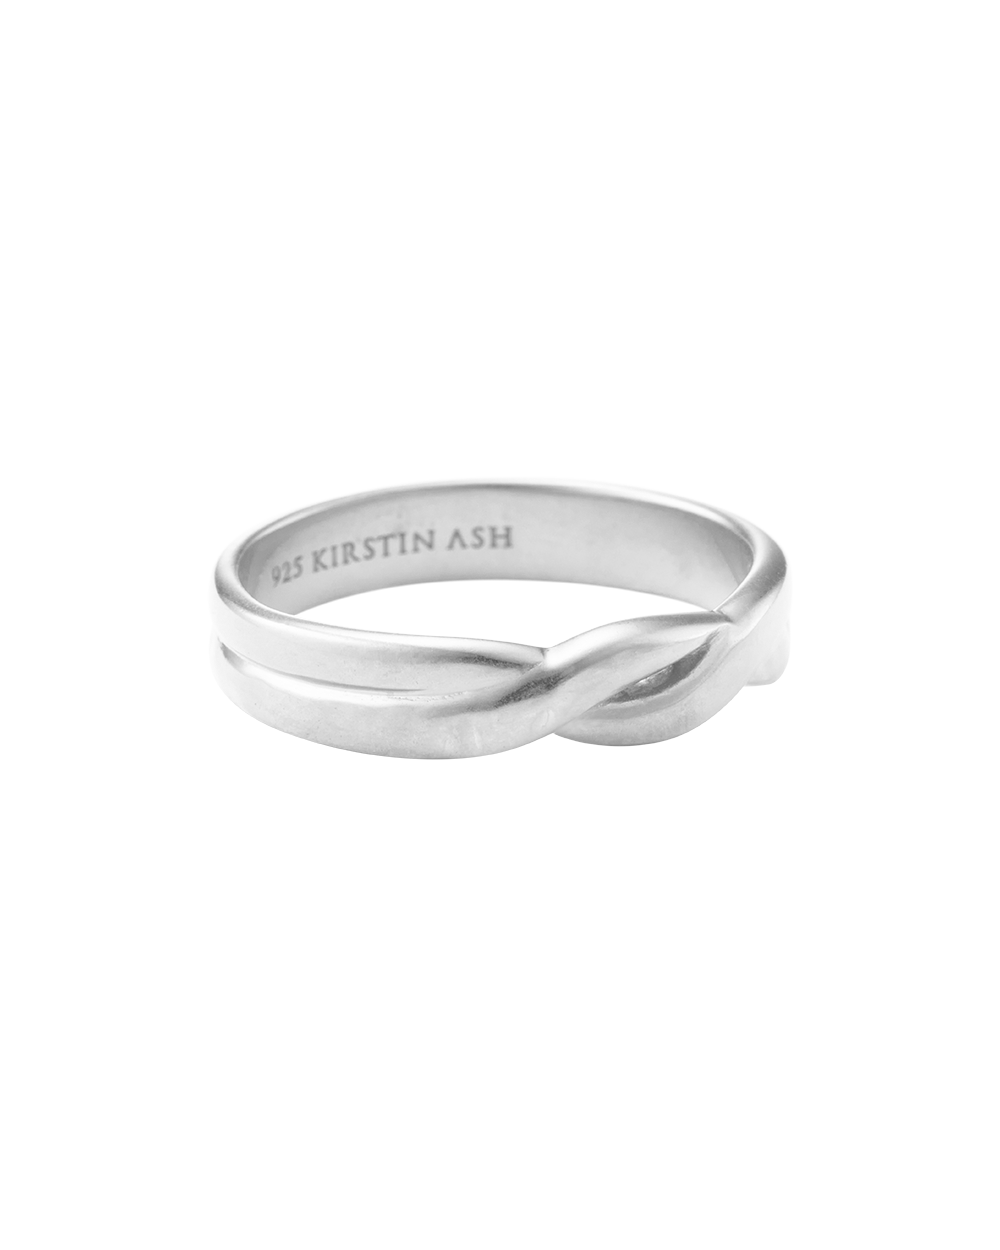 IDLE RING (STERLING SILVER)